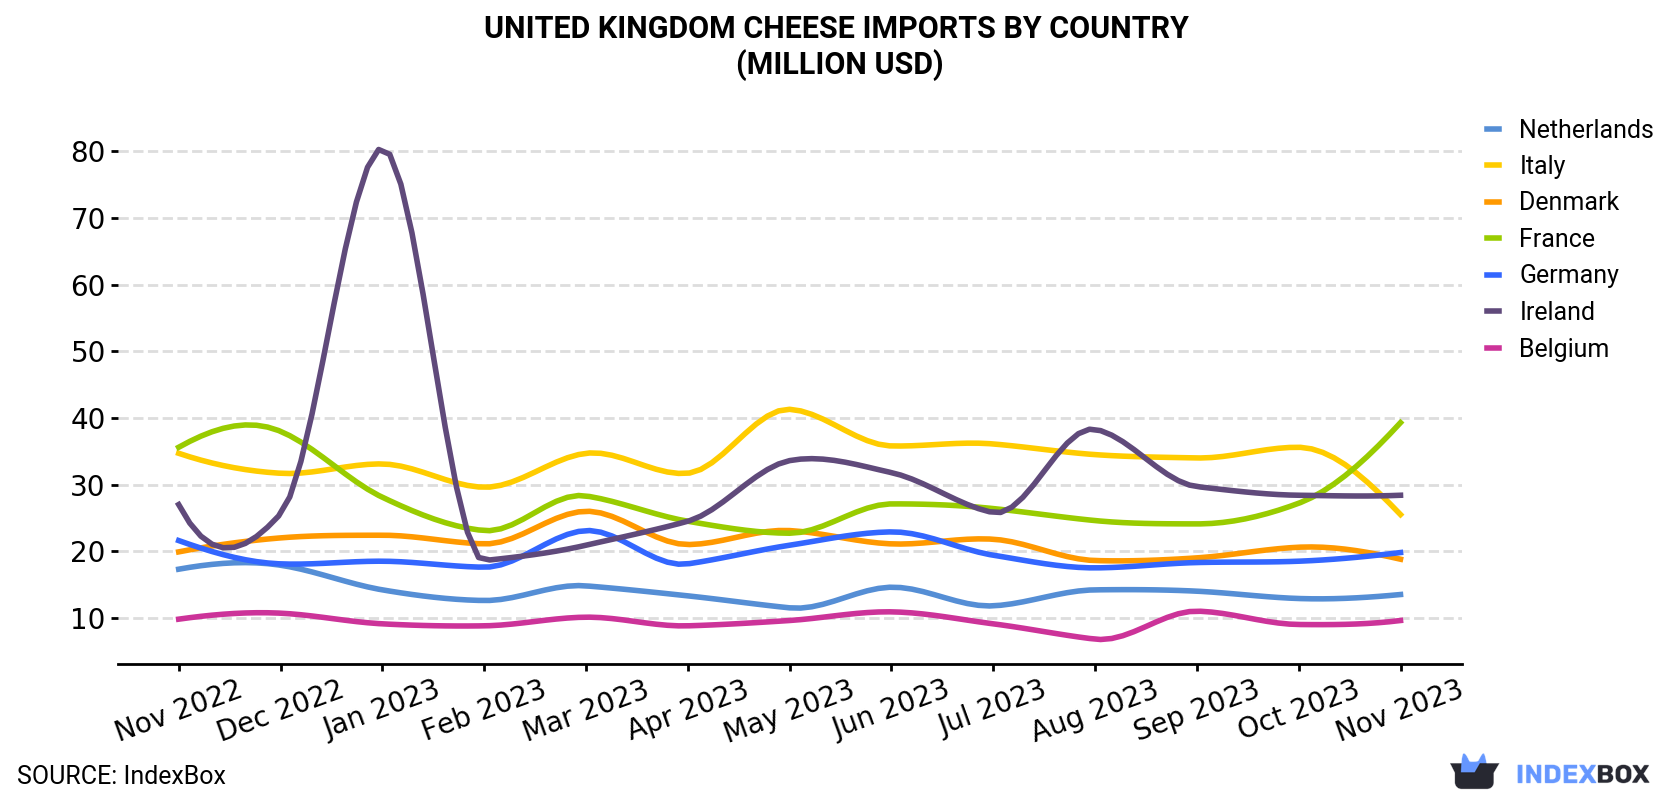 United Kingdom Cheese Imports By Country (Million USD)